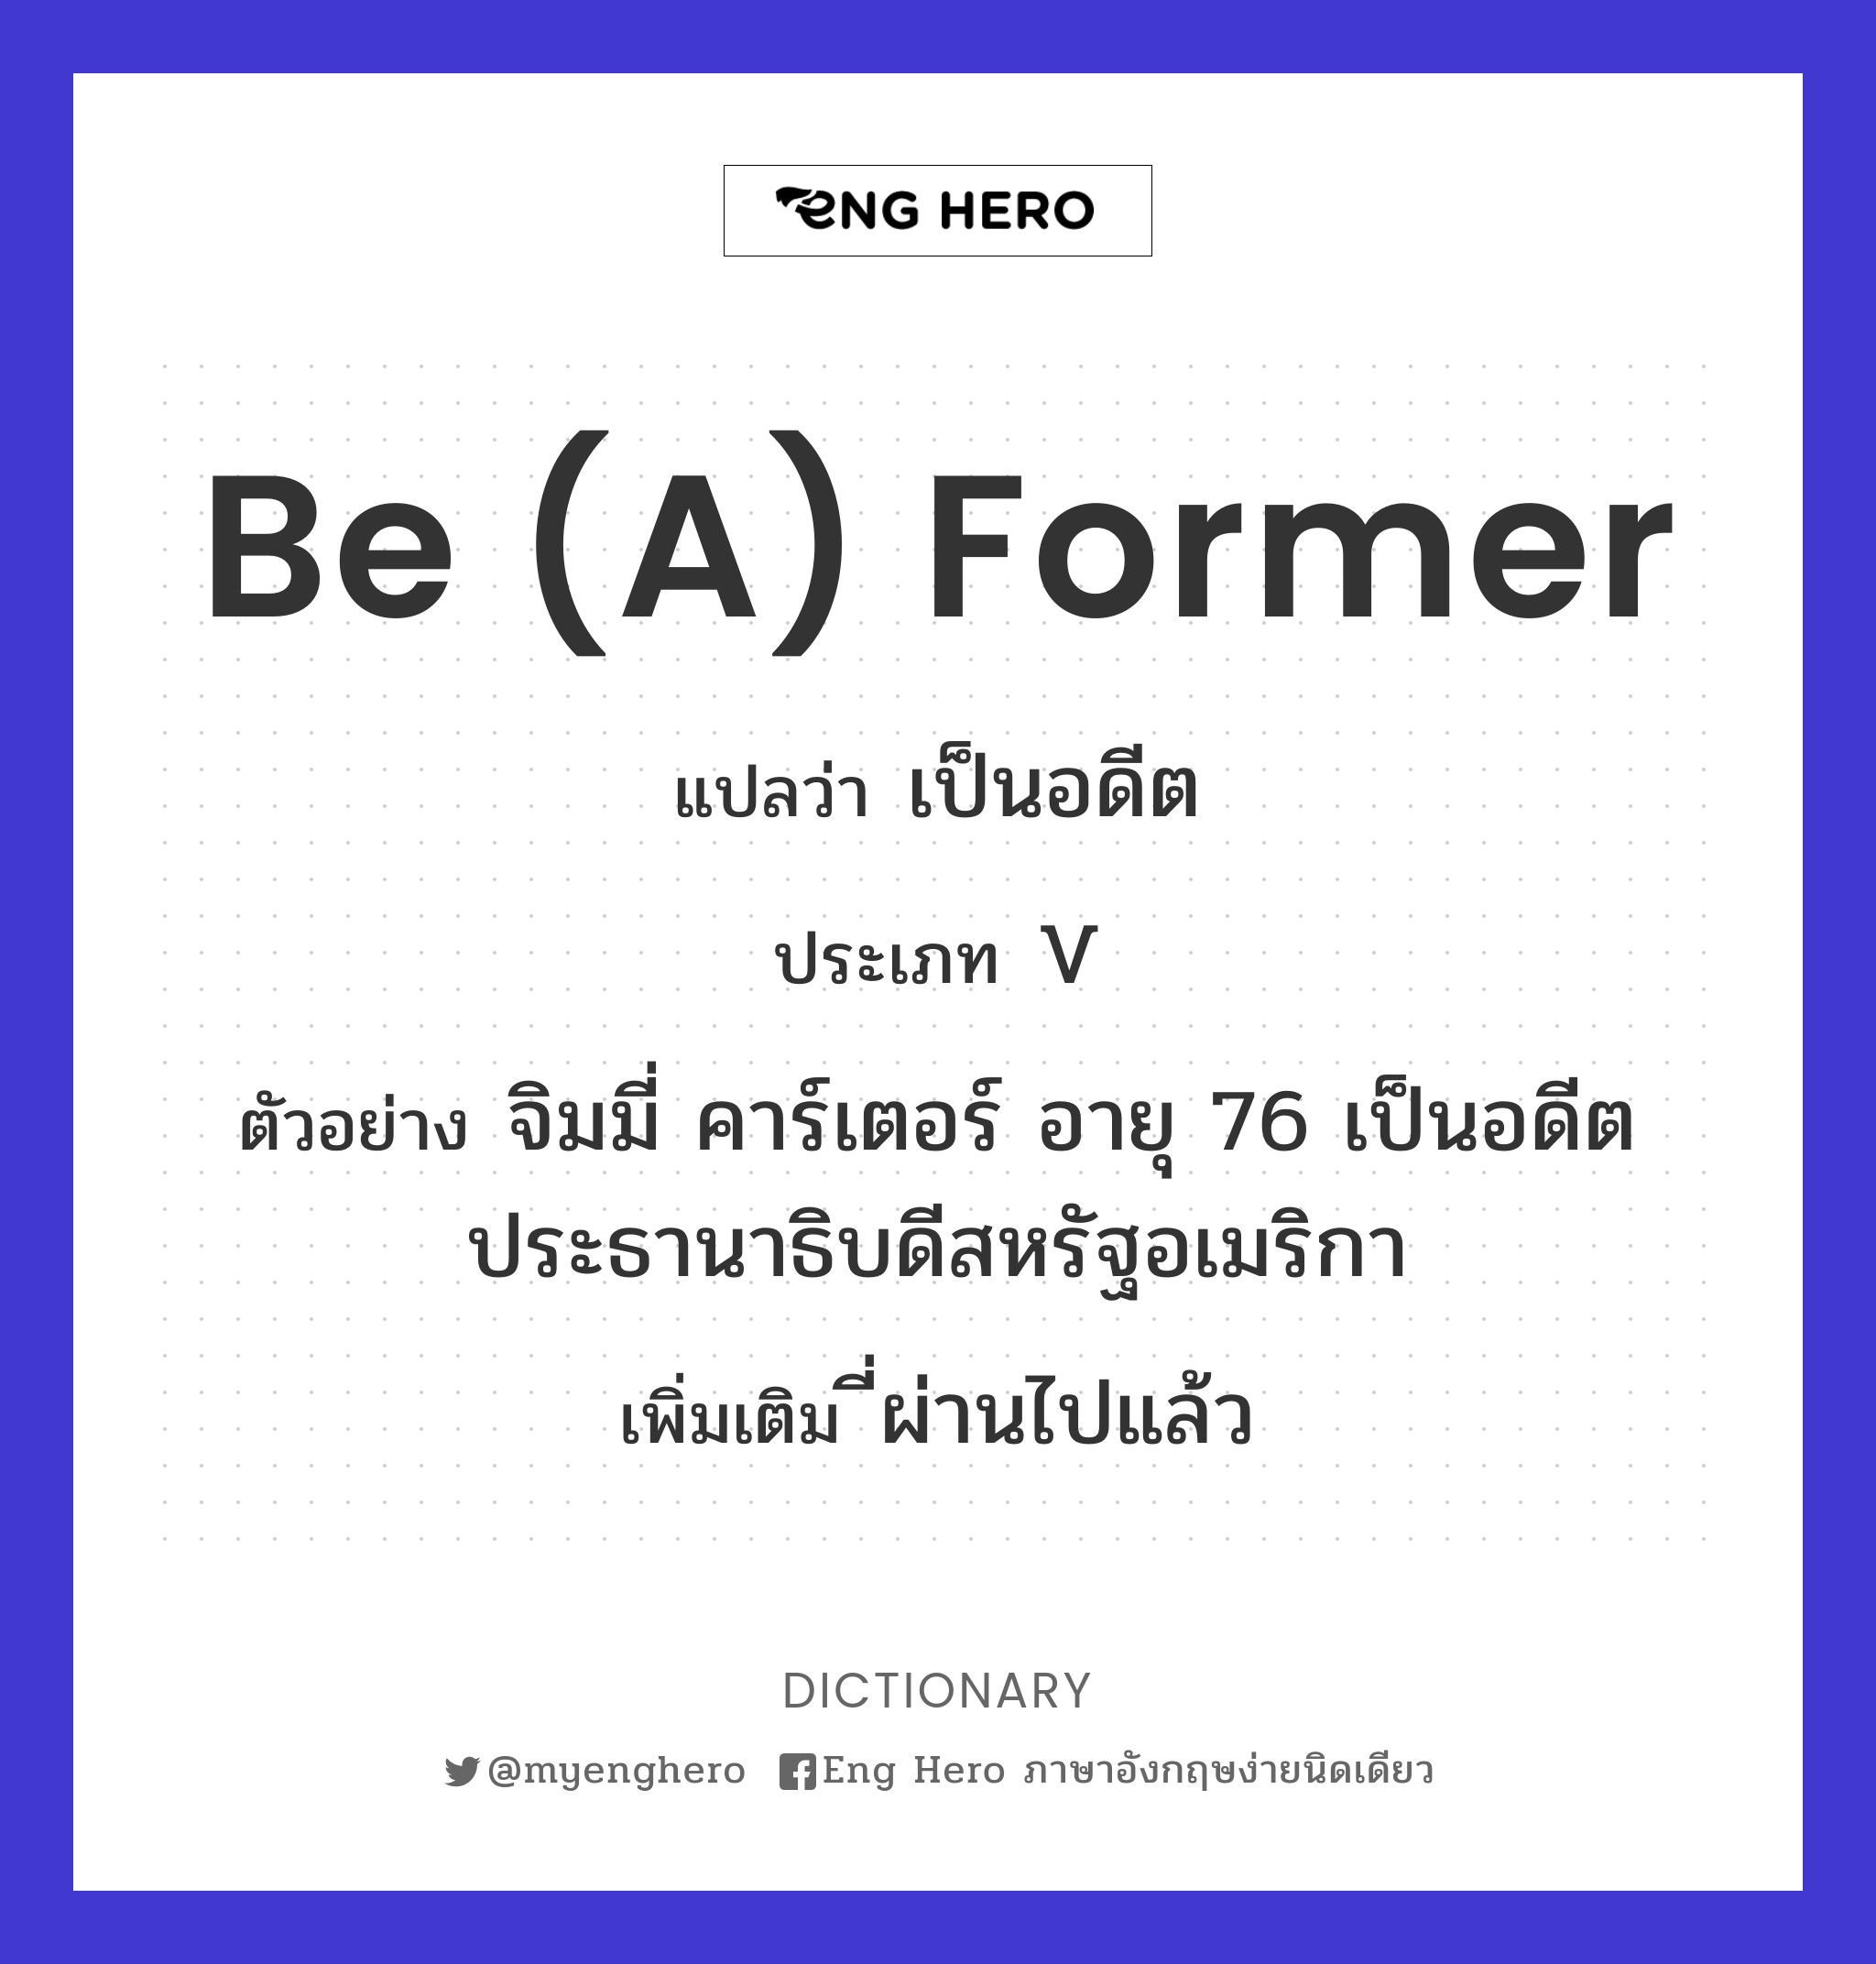 be (a) former